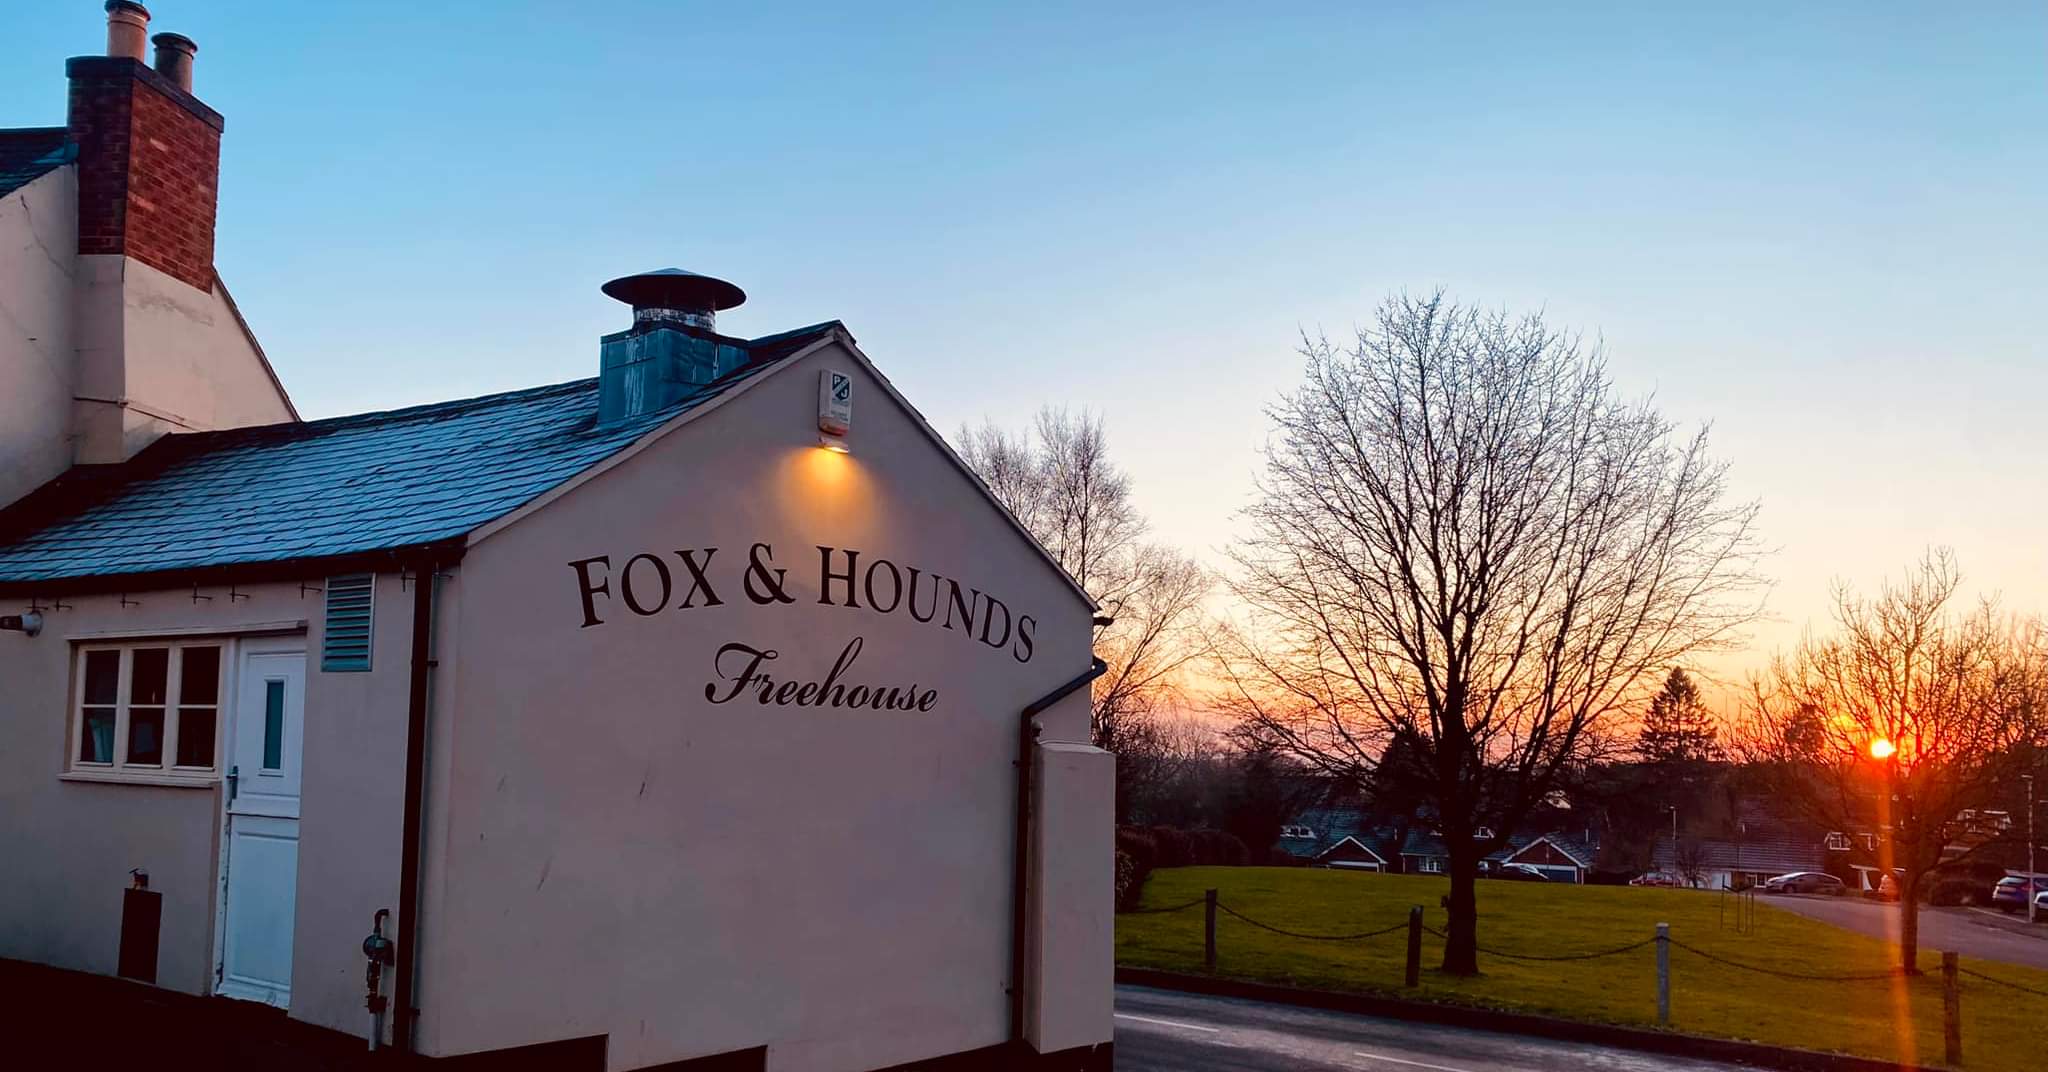 The Fox & Hounds Pub Tugby